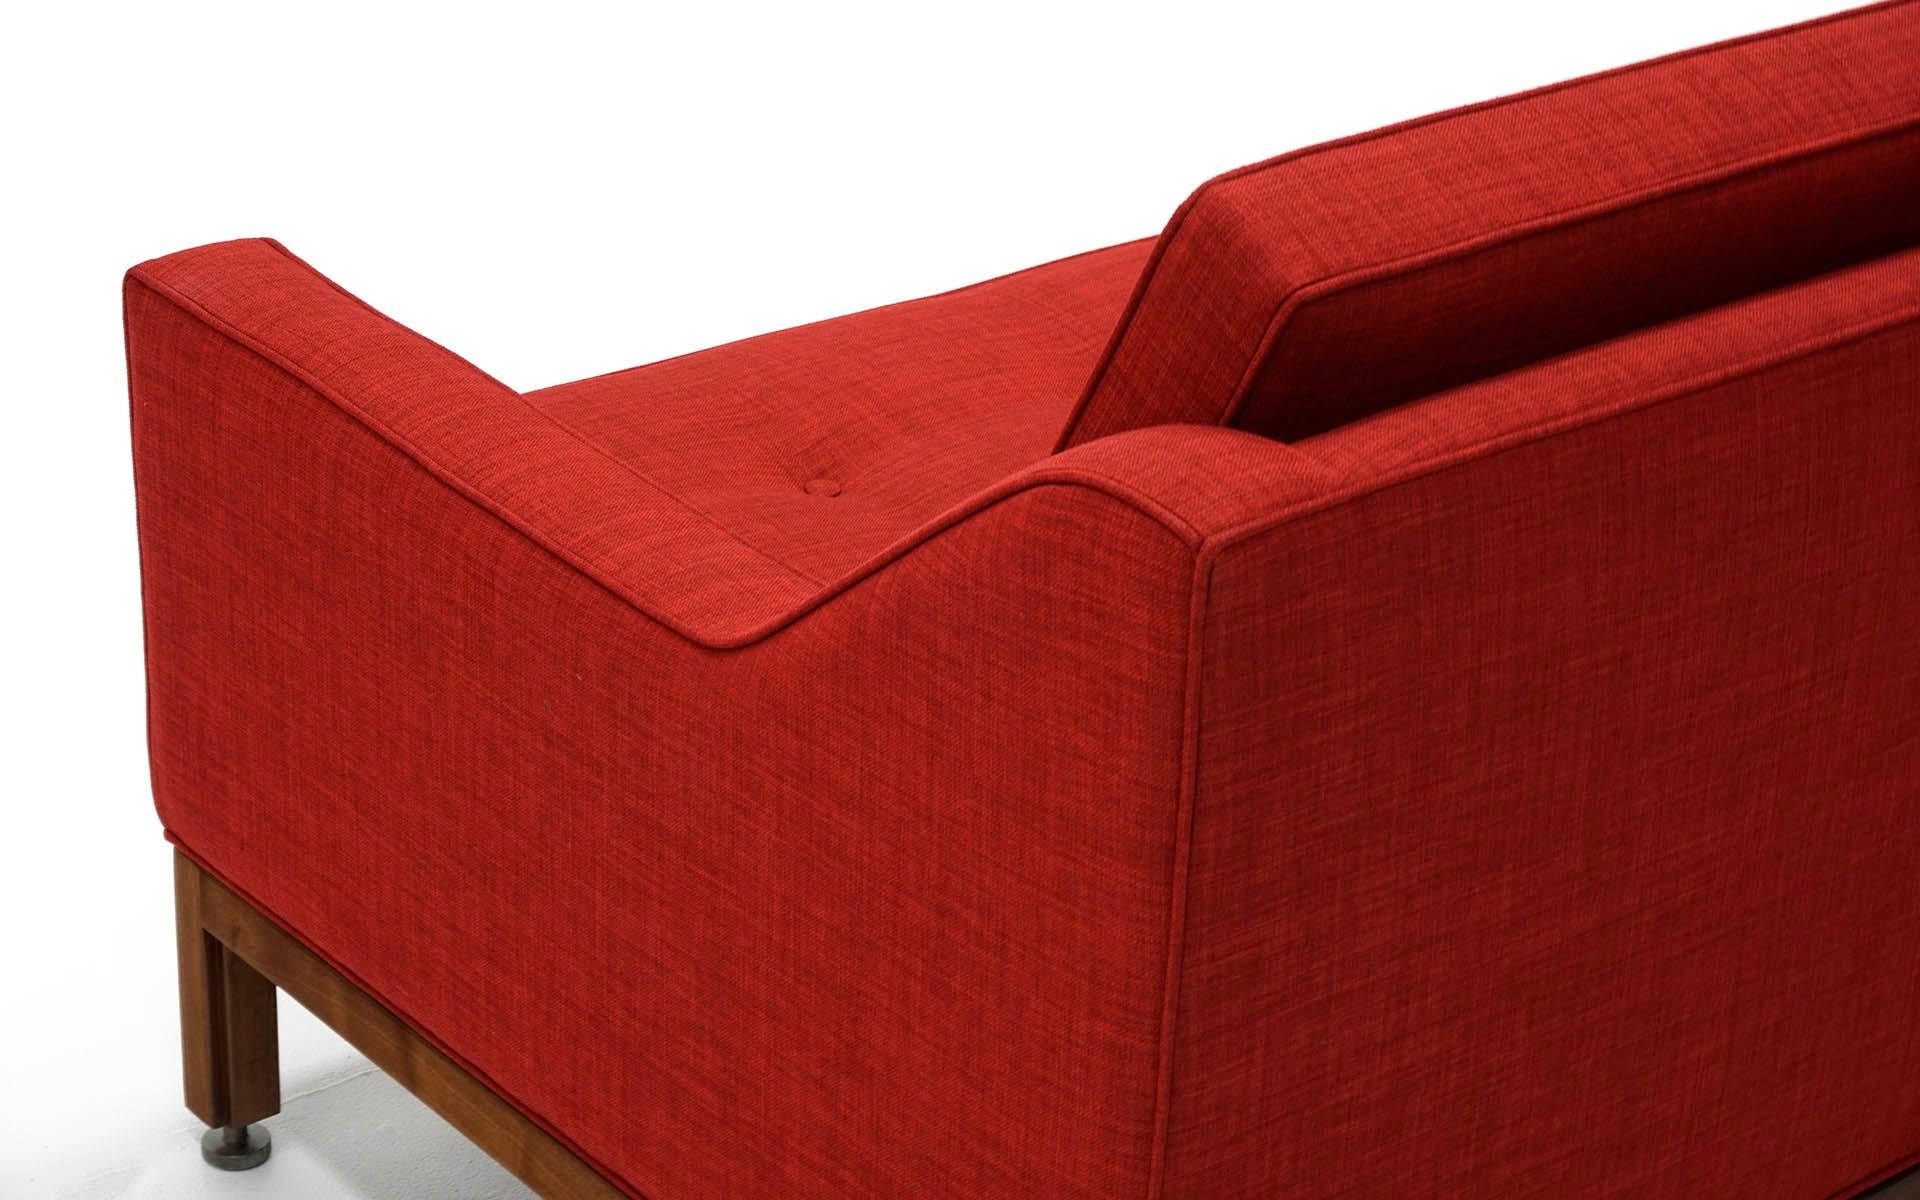 Upholstery Red Three-Seat Sofa with Walnut Frame by Jens Risom, Expertly Restored